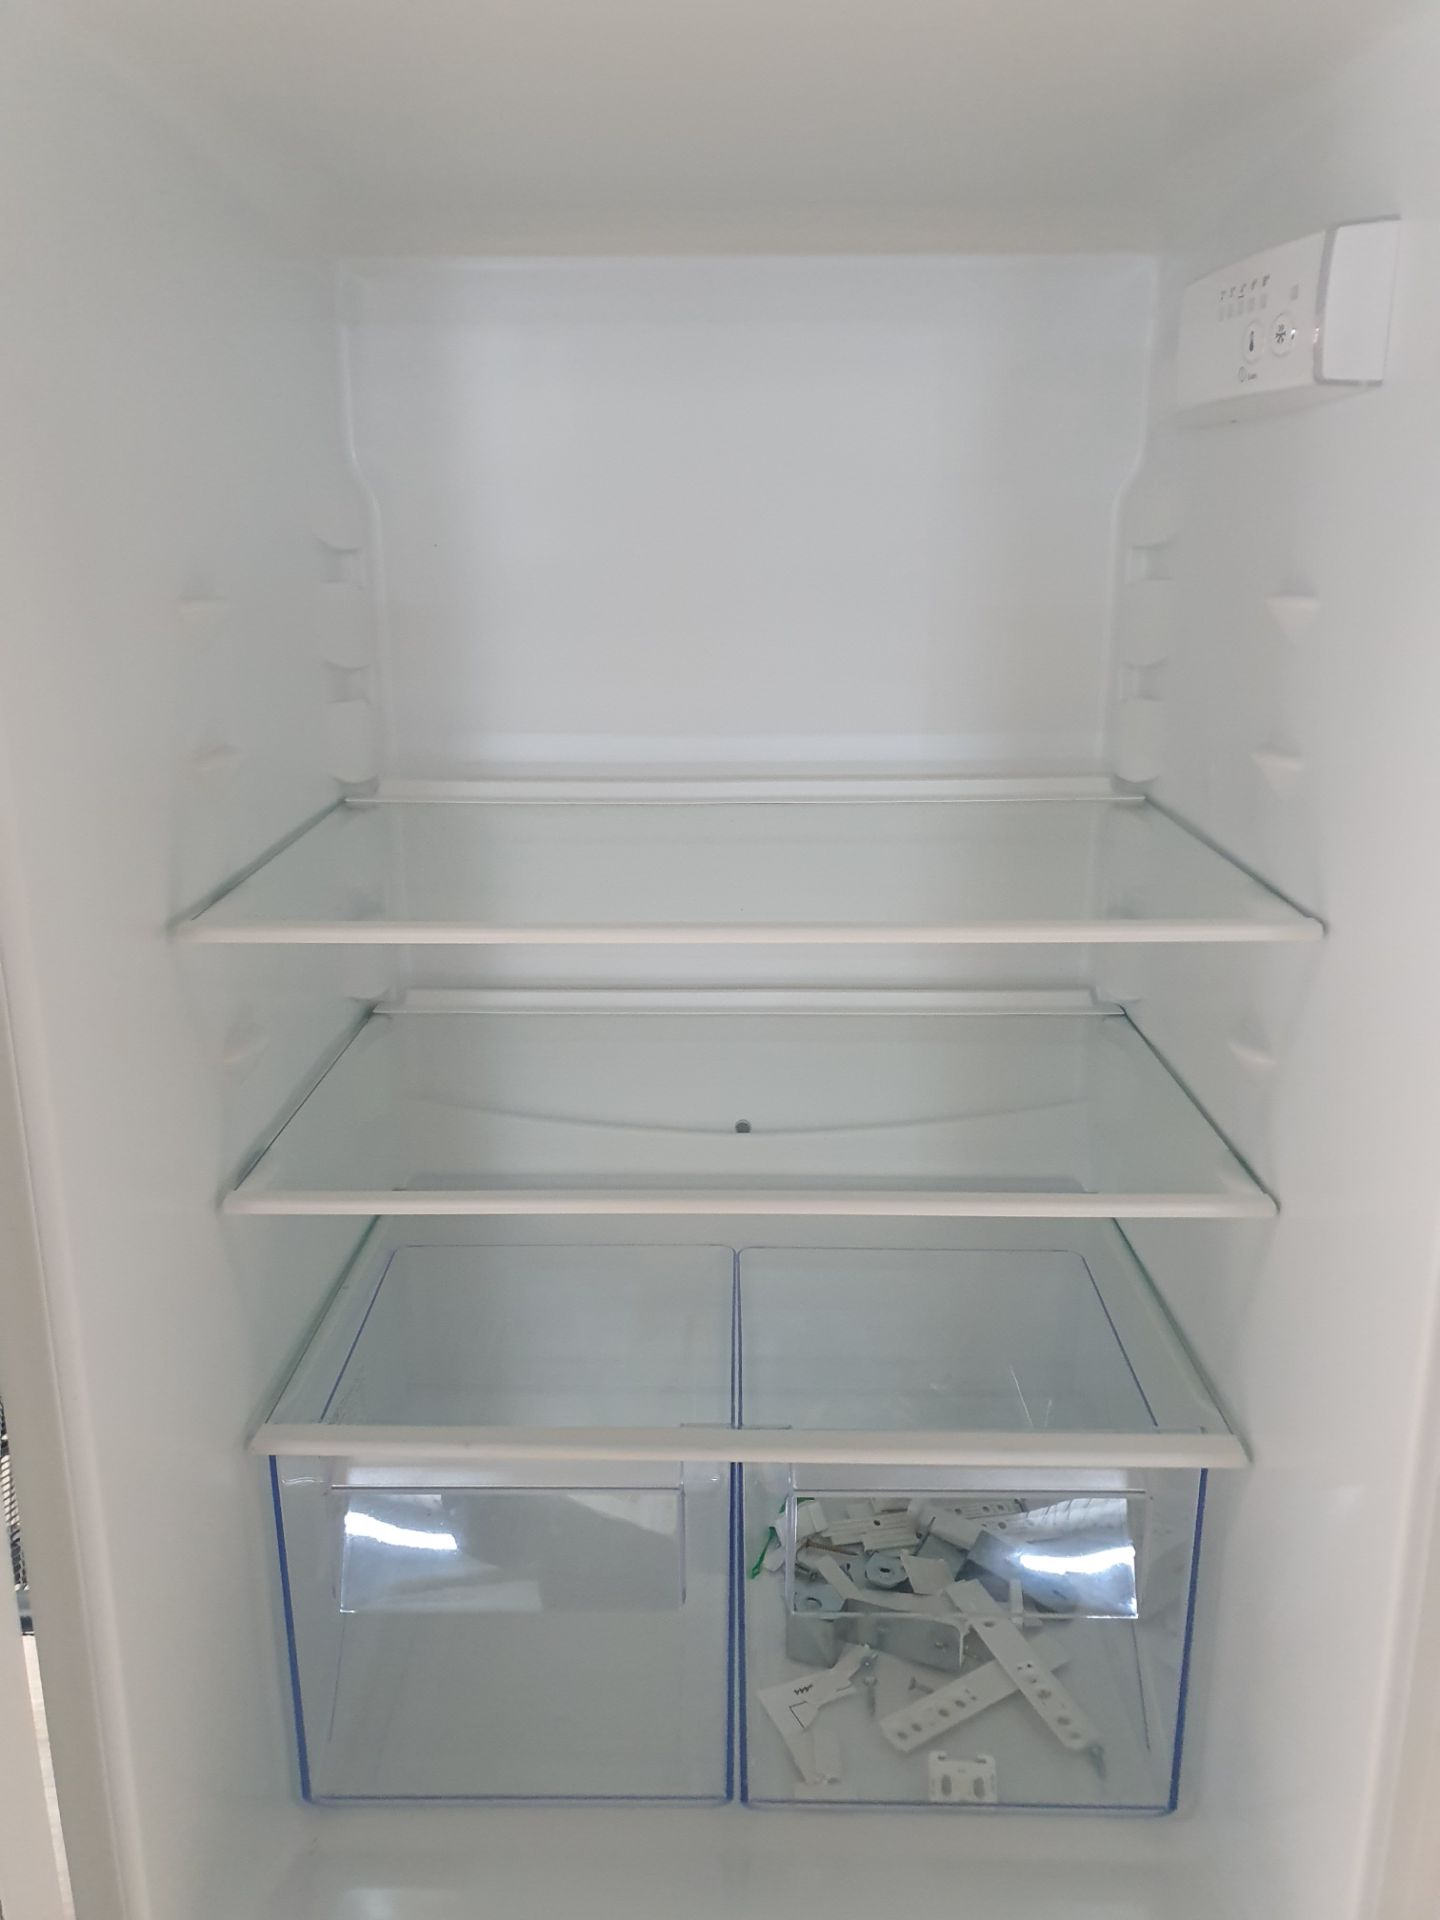 Current Online Price £859. Smeg Universal Built In Right Hinge Refrigerator White UKC4172F - Image 3 of 16